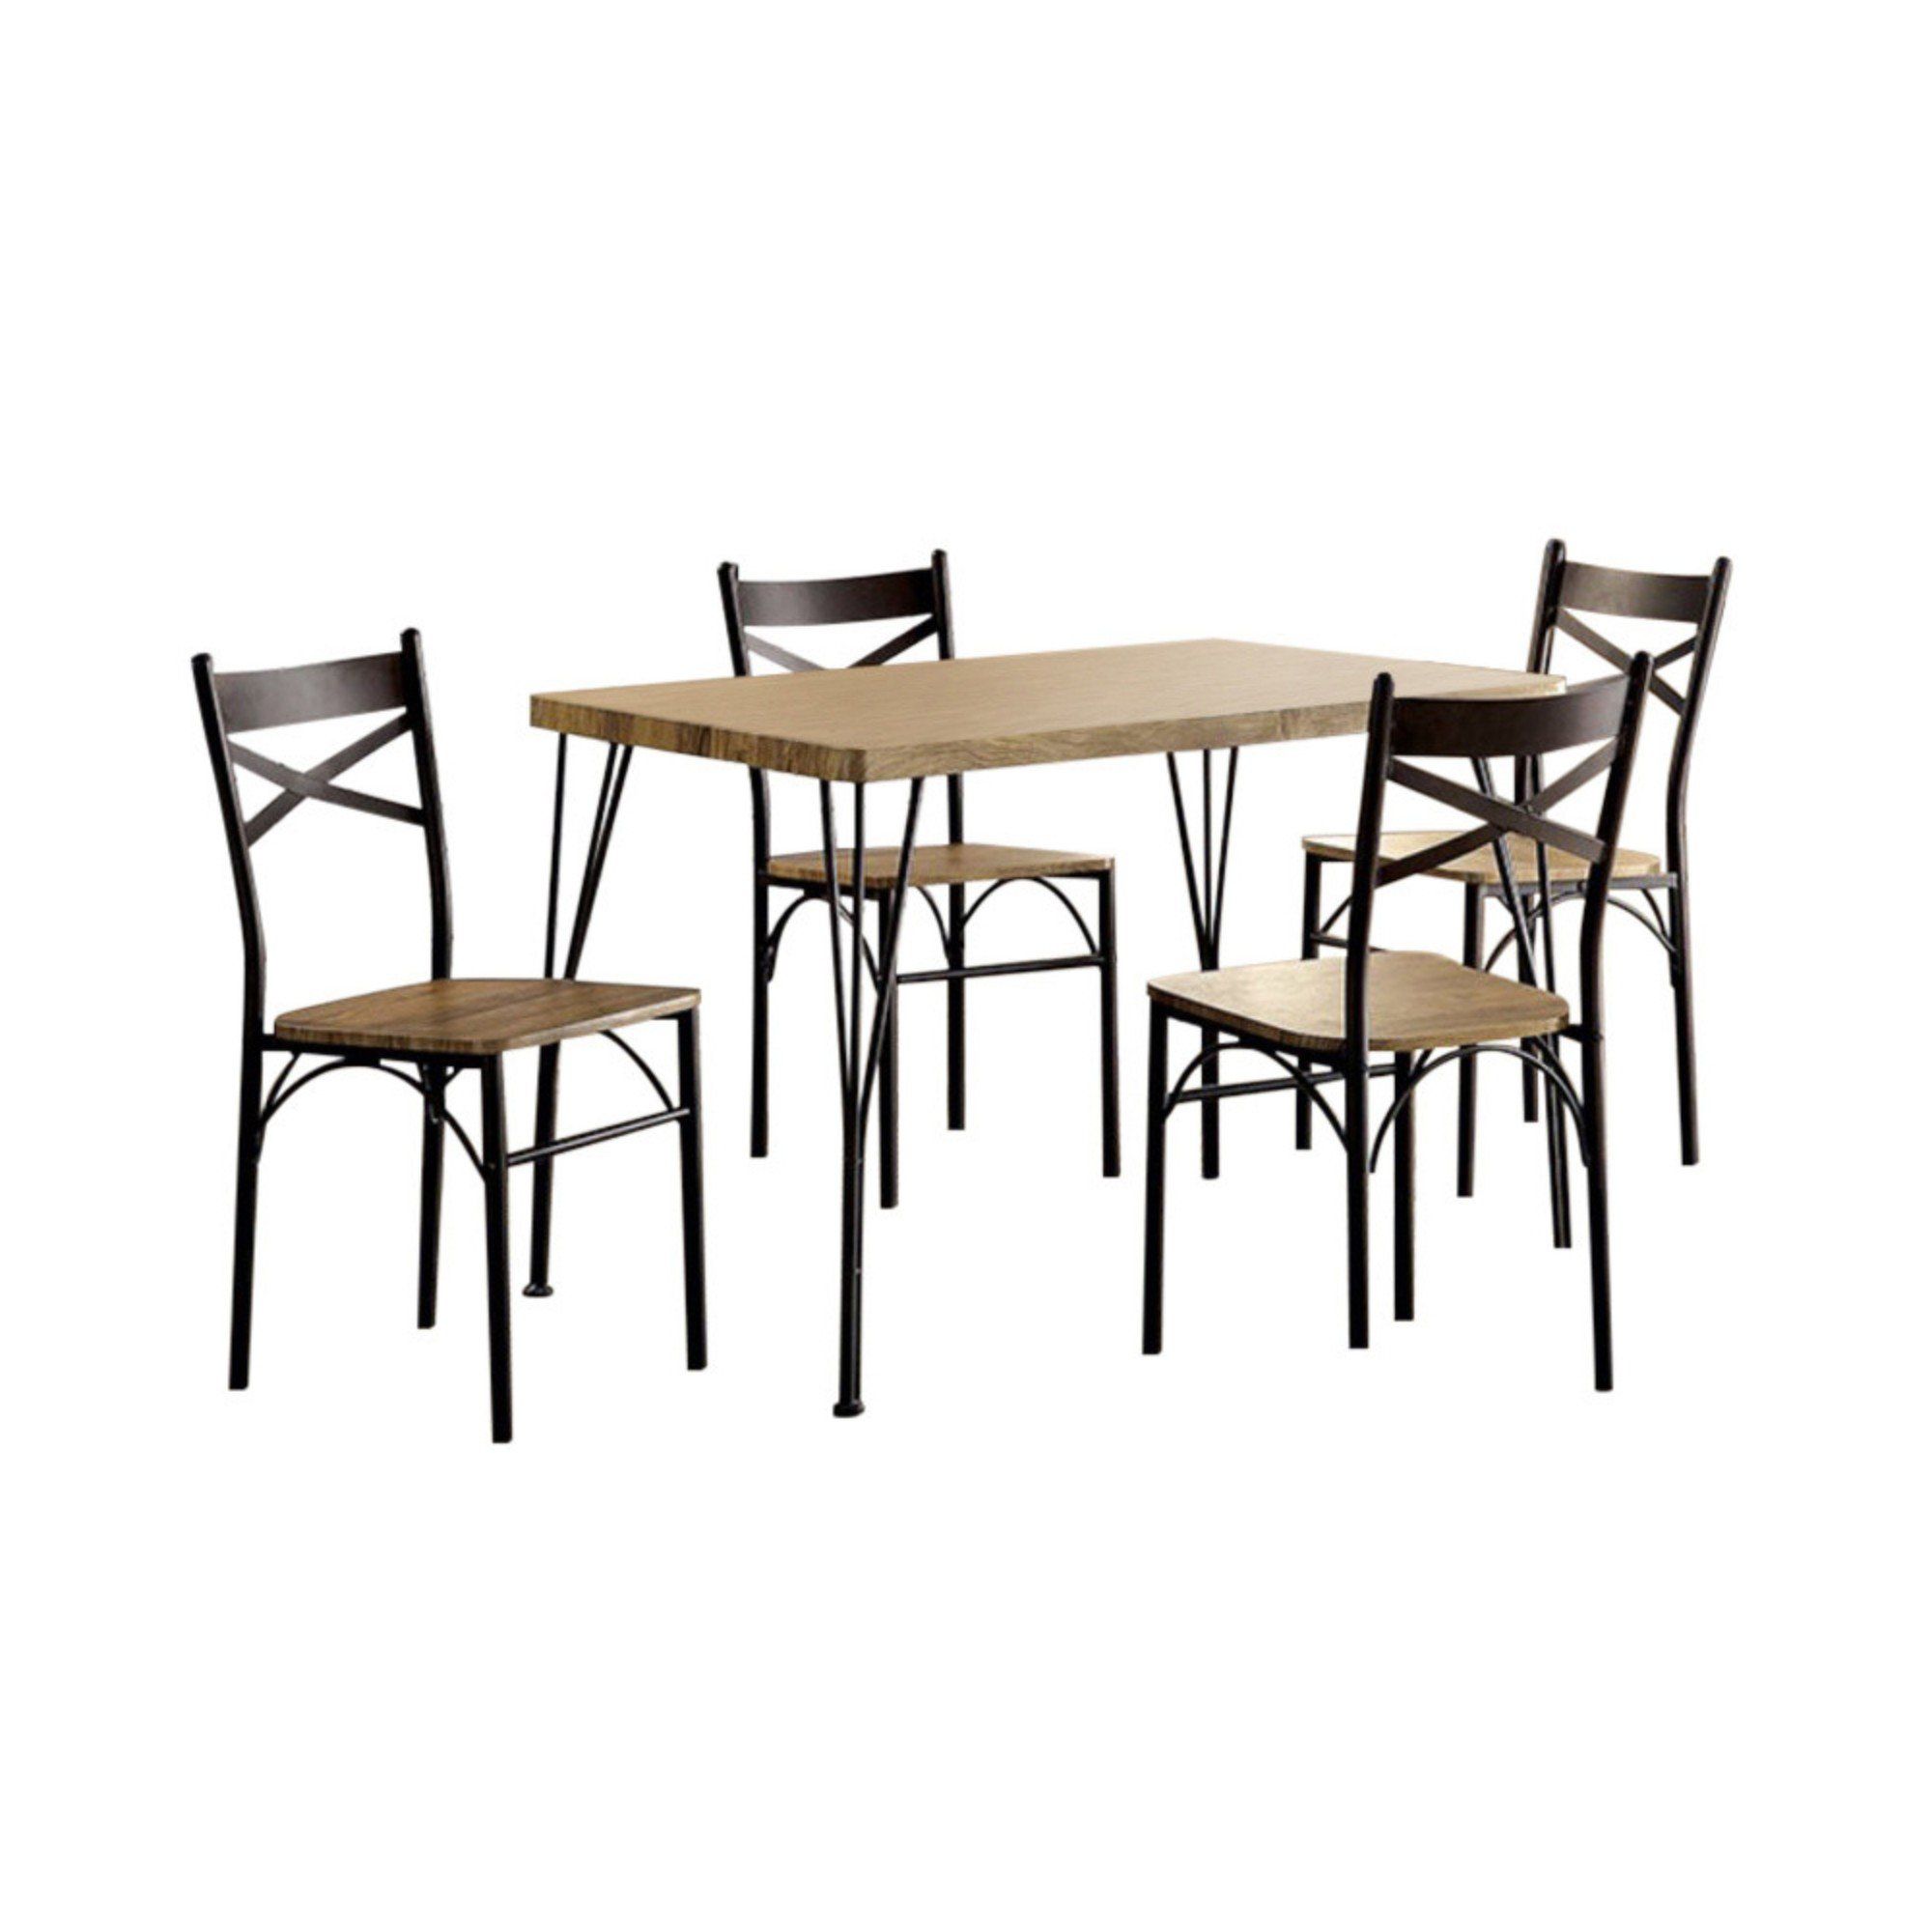 Owasco 5 Piece Dining Set Intended For Most Recent Conover 5 Piece Dining Sets (View 6 of 20)